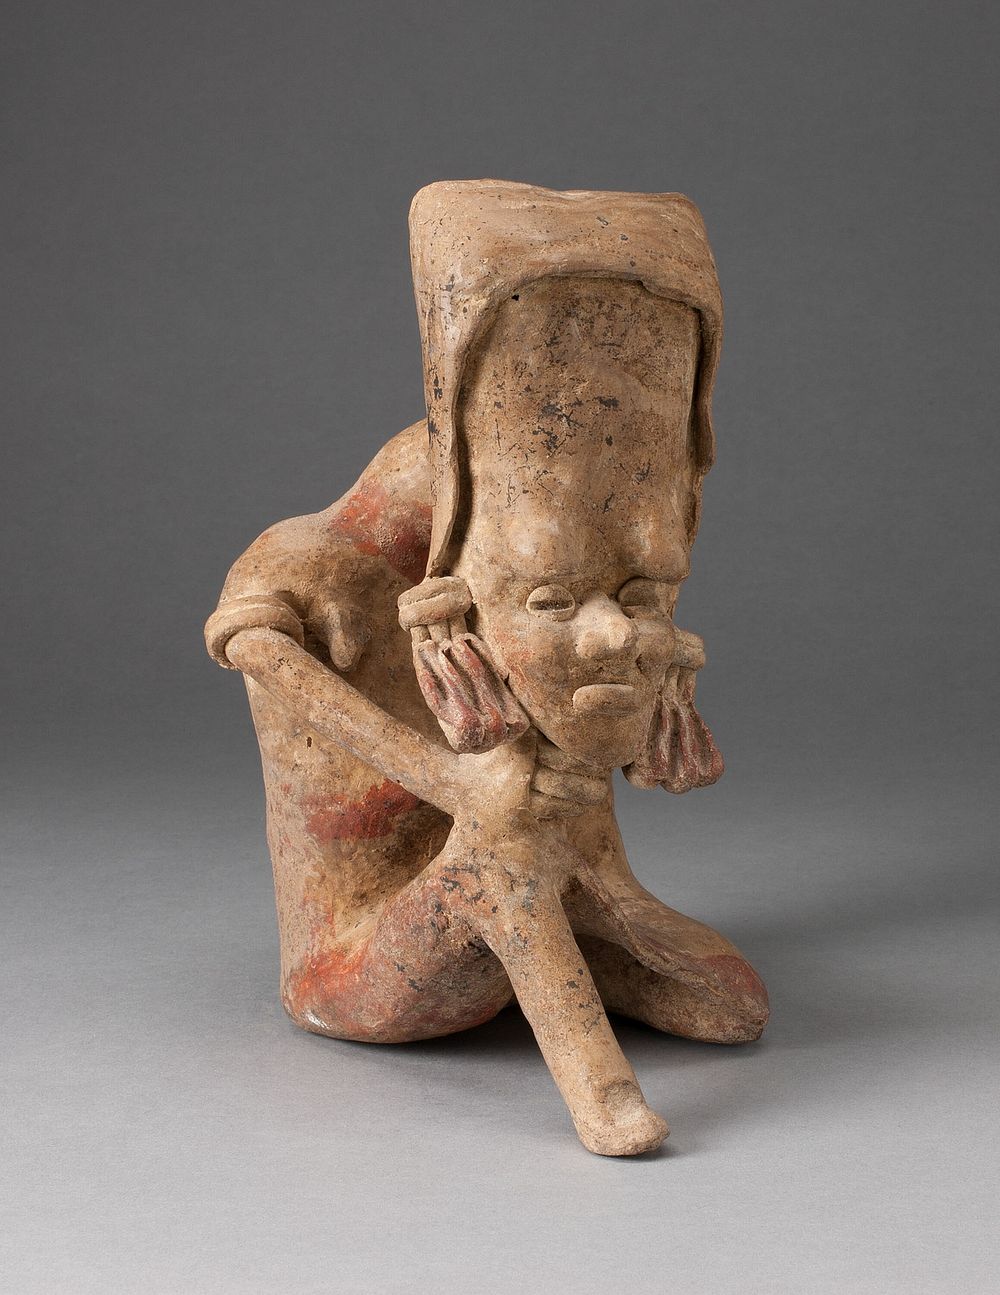 Seated Figure with an Elongated Head and Chin Placed on Knee by Jalisco